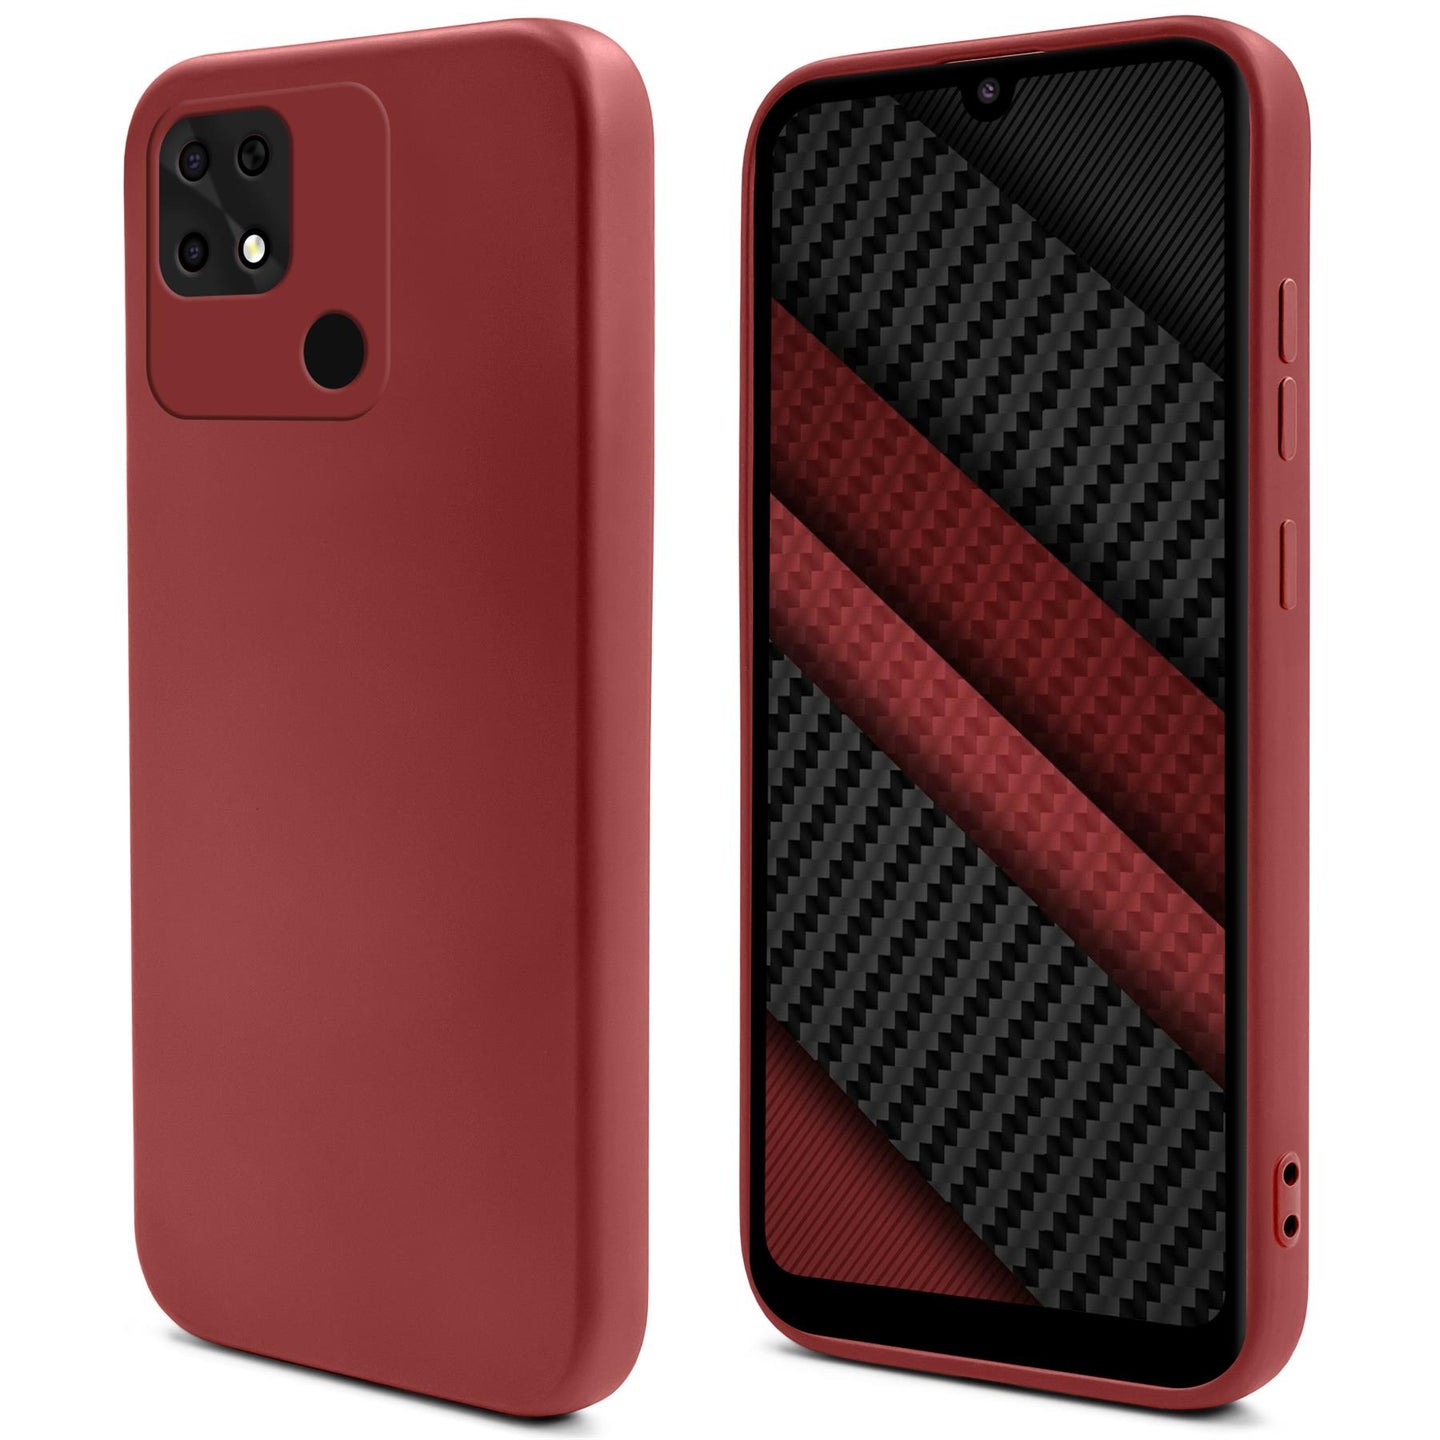 Moozy Lifestyle. Silicone Case for Xiaomi Redmi 10C, Vintage Pink - Liquid Silicone Lightweight Cover with Matte Finish and Soft Microfiber Lining, Premium Silicone Case